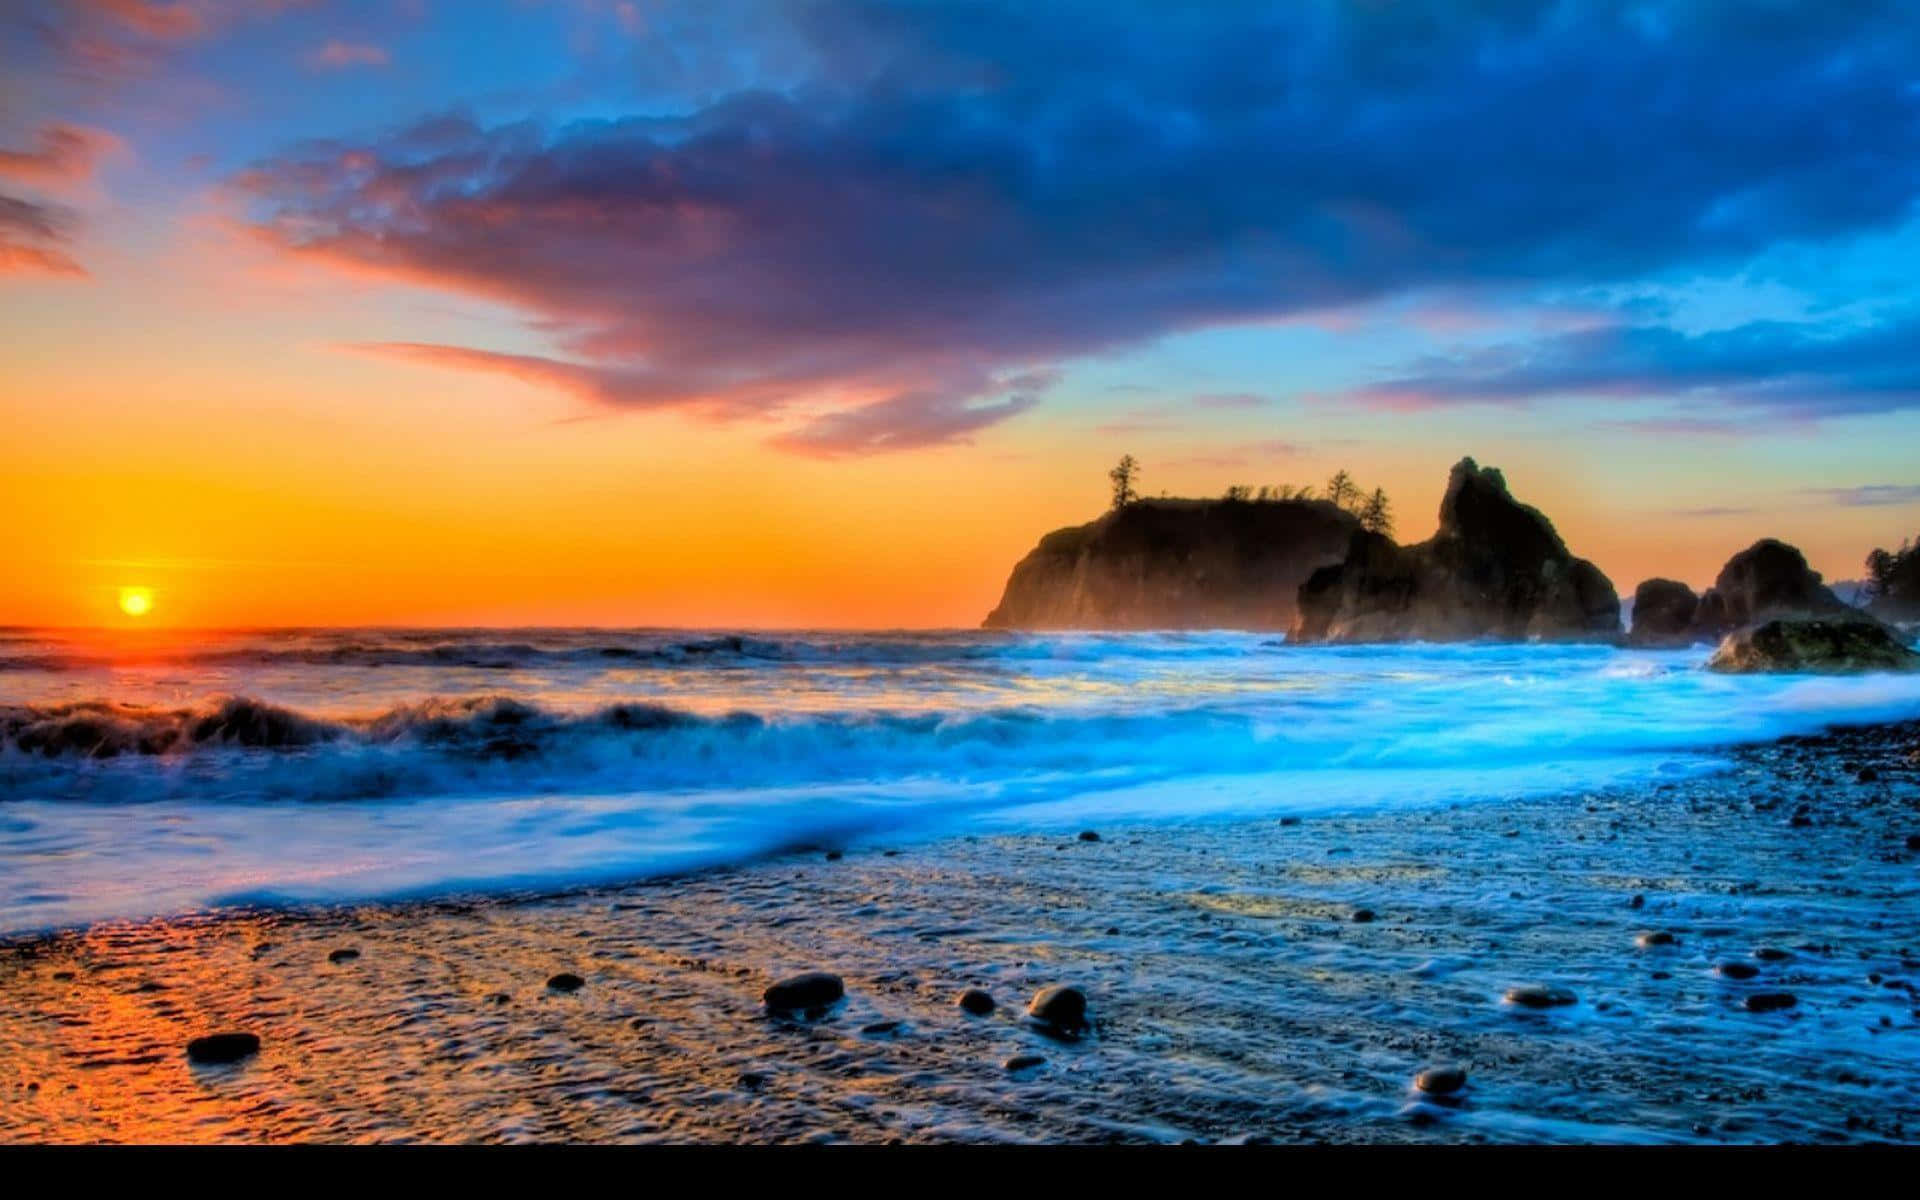 Experience the calming beauty of a beach sunset from the comfort of your desktop. Wallpaper